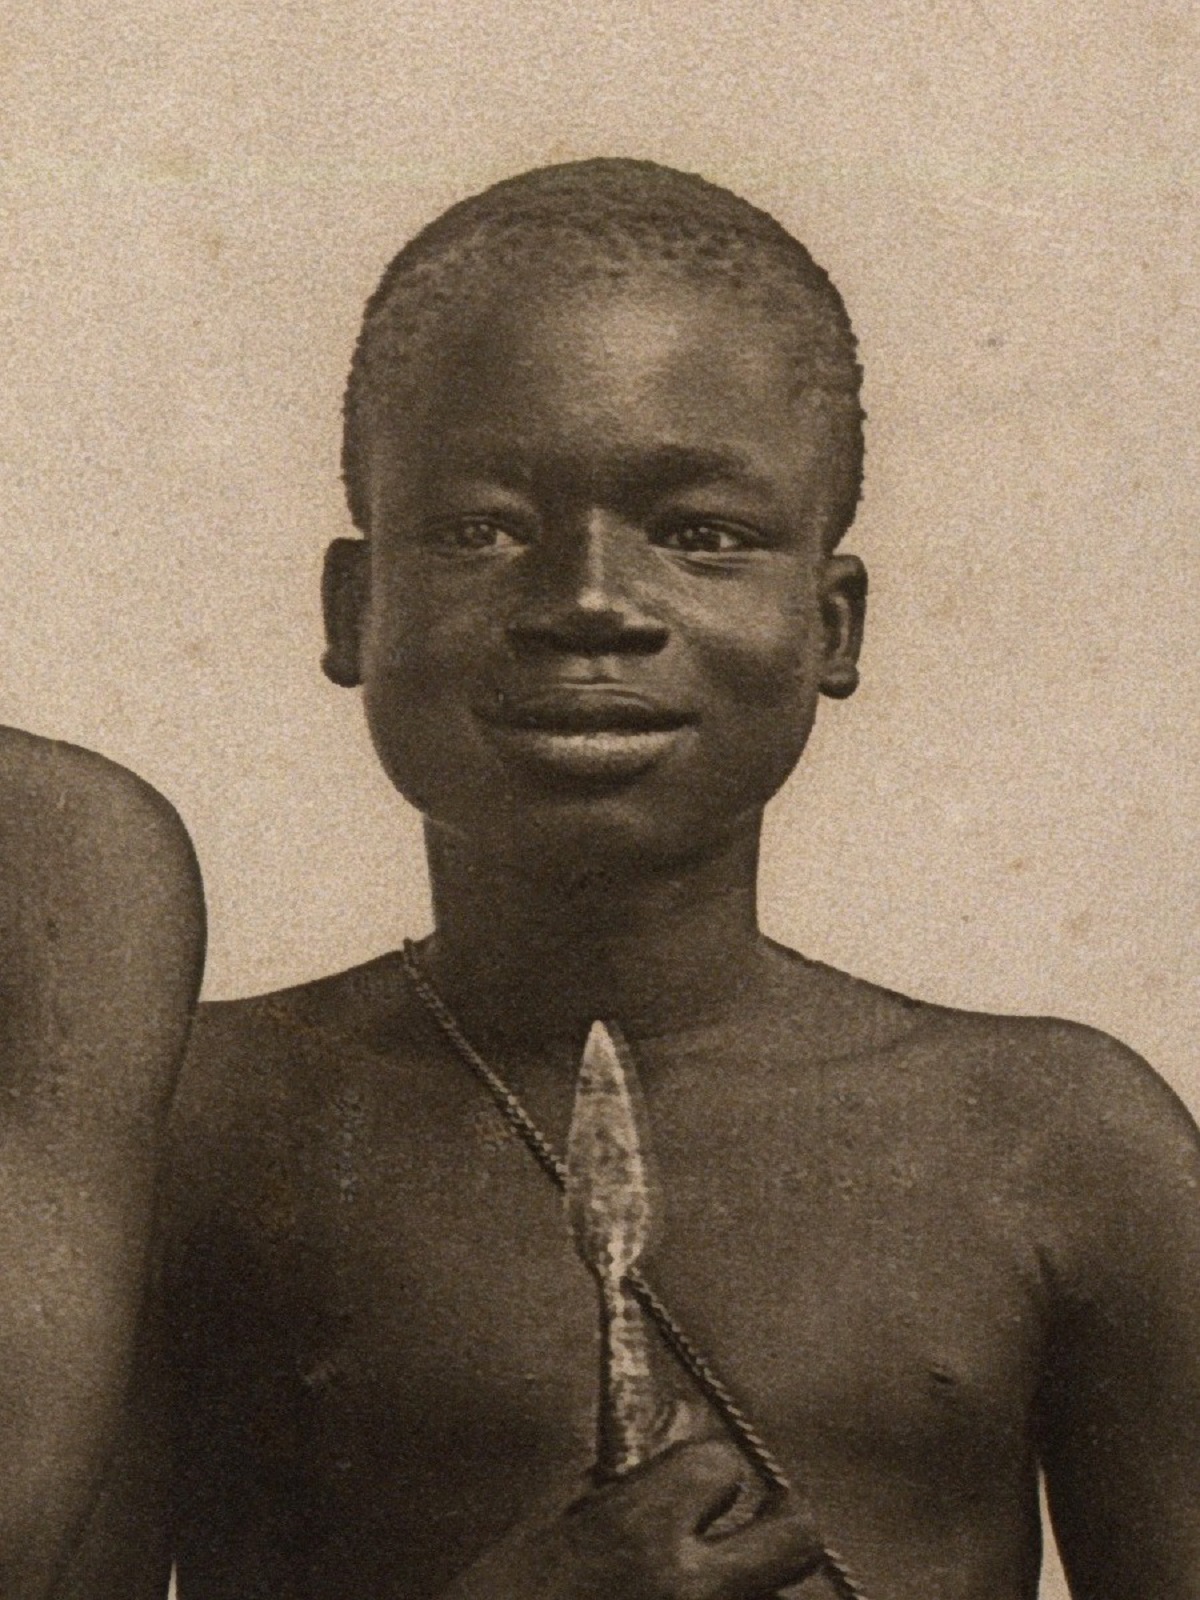 about Ota Benga - a young boy from Congo who was kidnapped at the beginning of the 20th century to be held at a zoo with monkeys.